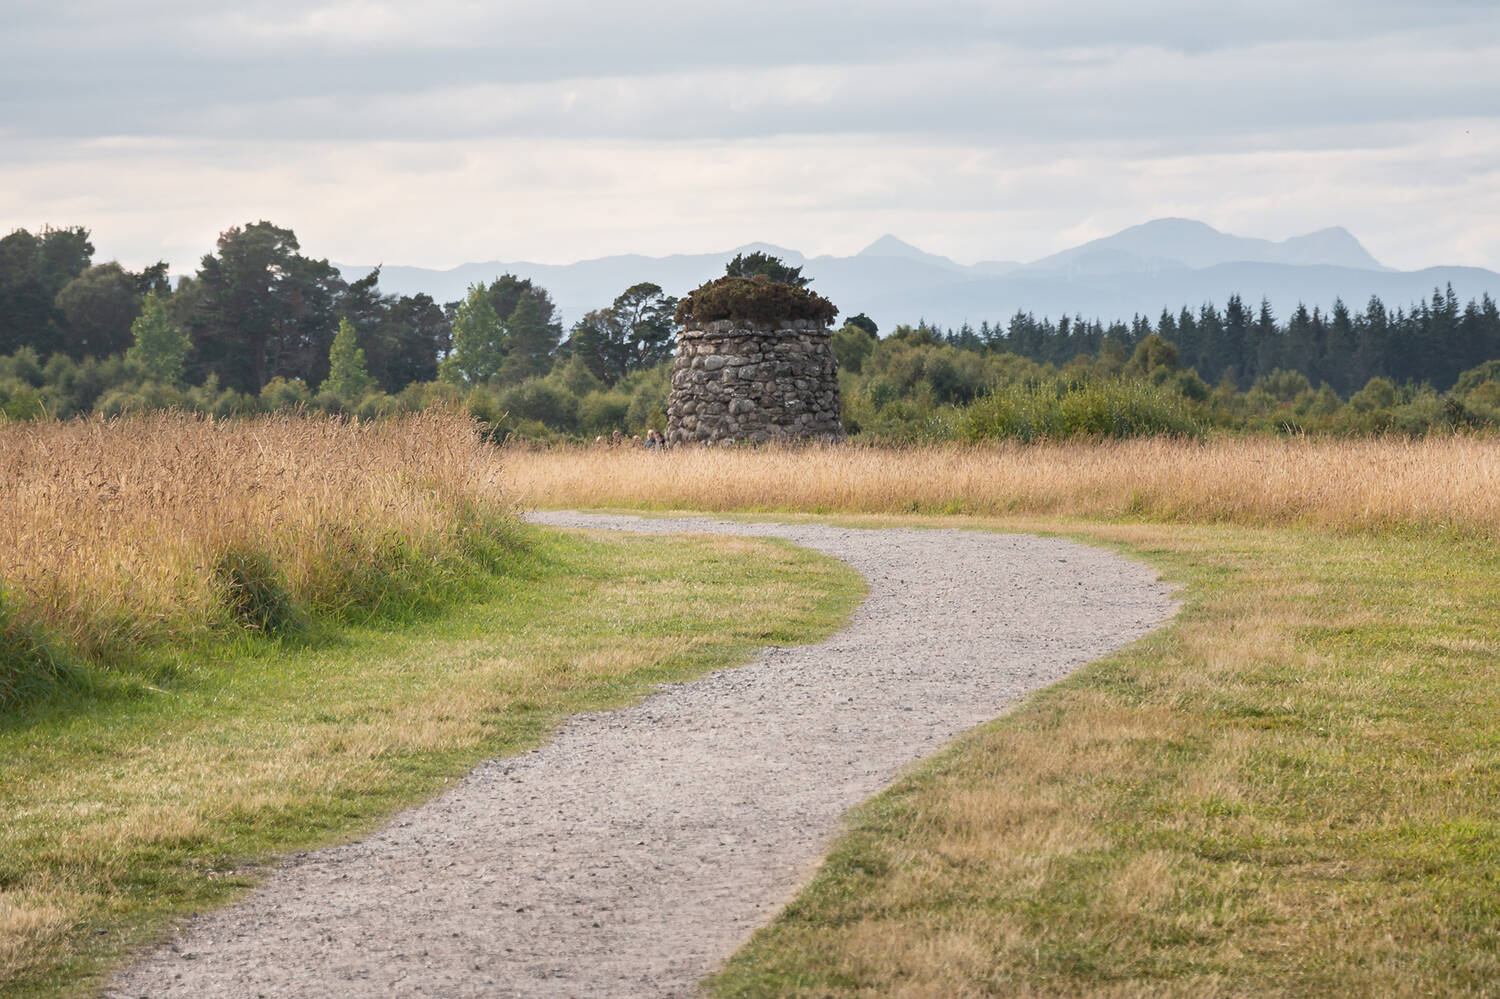 A view of the large, stone memorial cairn at the centre of Culloden battlefield. A wide stone track leads up to it across the moor.